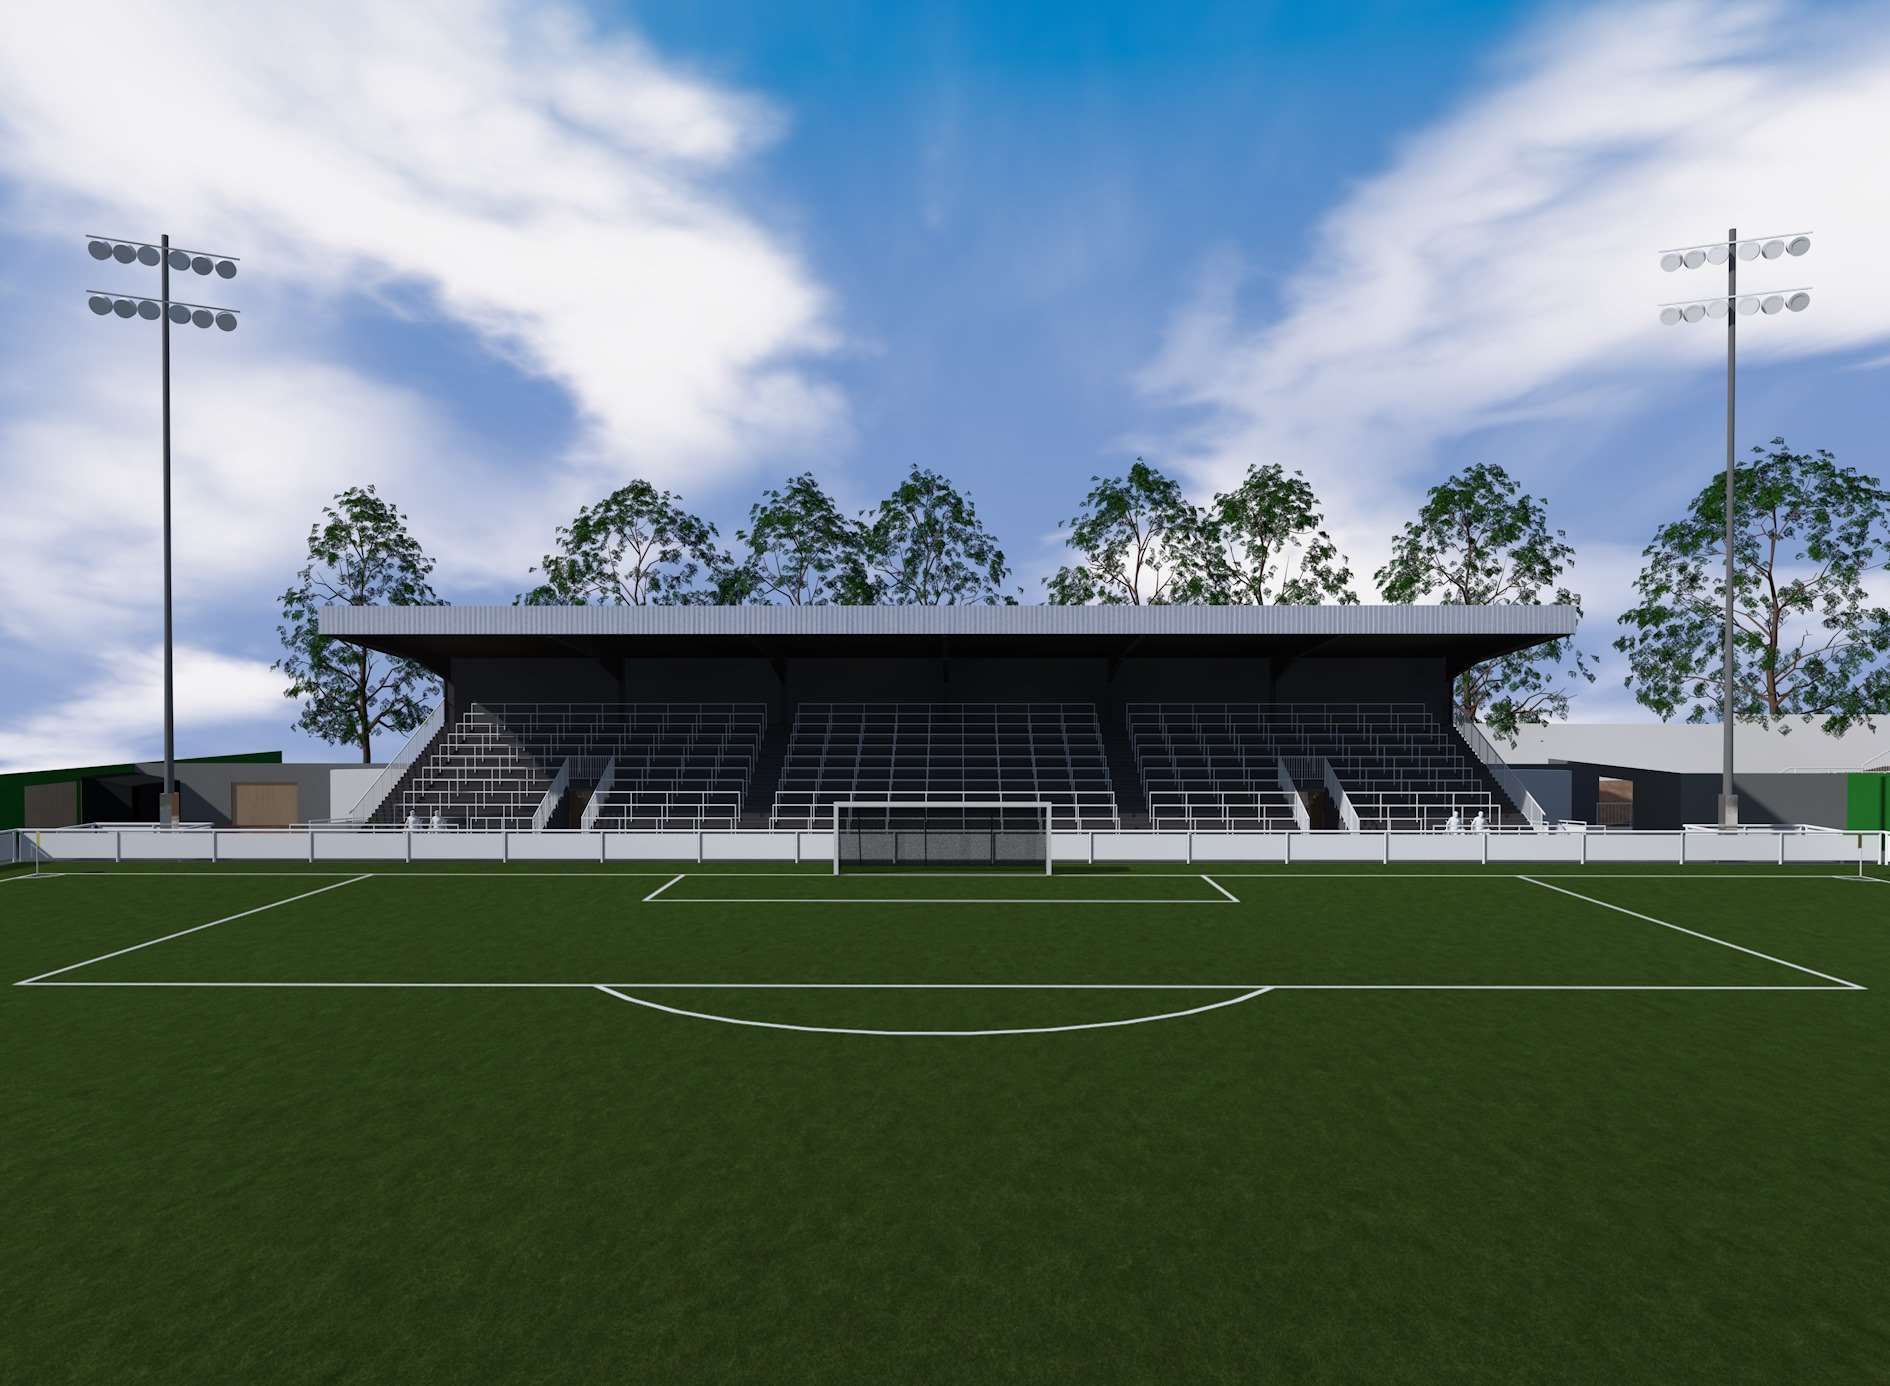 The new stand at the Gallagher Stadium